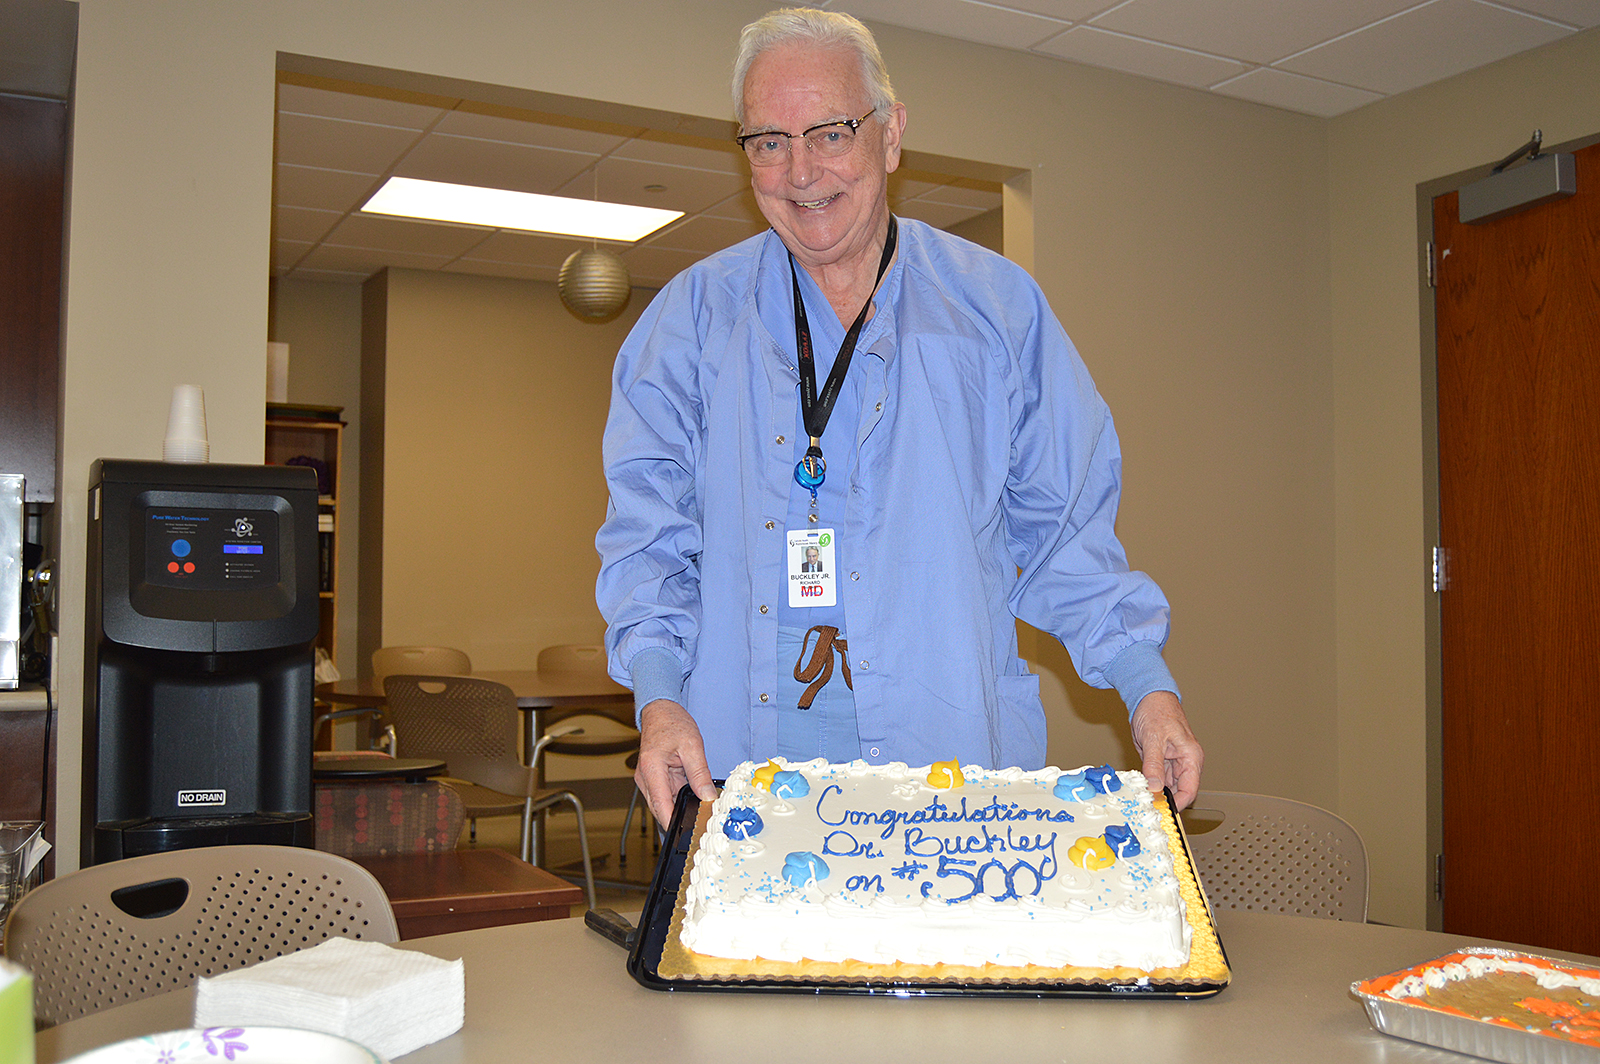 Dr. Richard J. Buckley Jr. completed his 500th surgery on Dec. 10, using the da Vinci Robot surgical system at Kenmore Mercy Hospital.
Courtesy of Kenmore Mercy Hospital